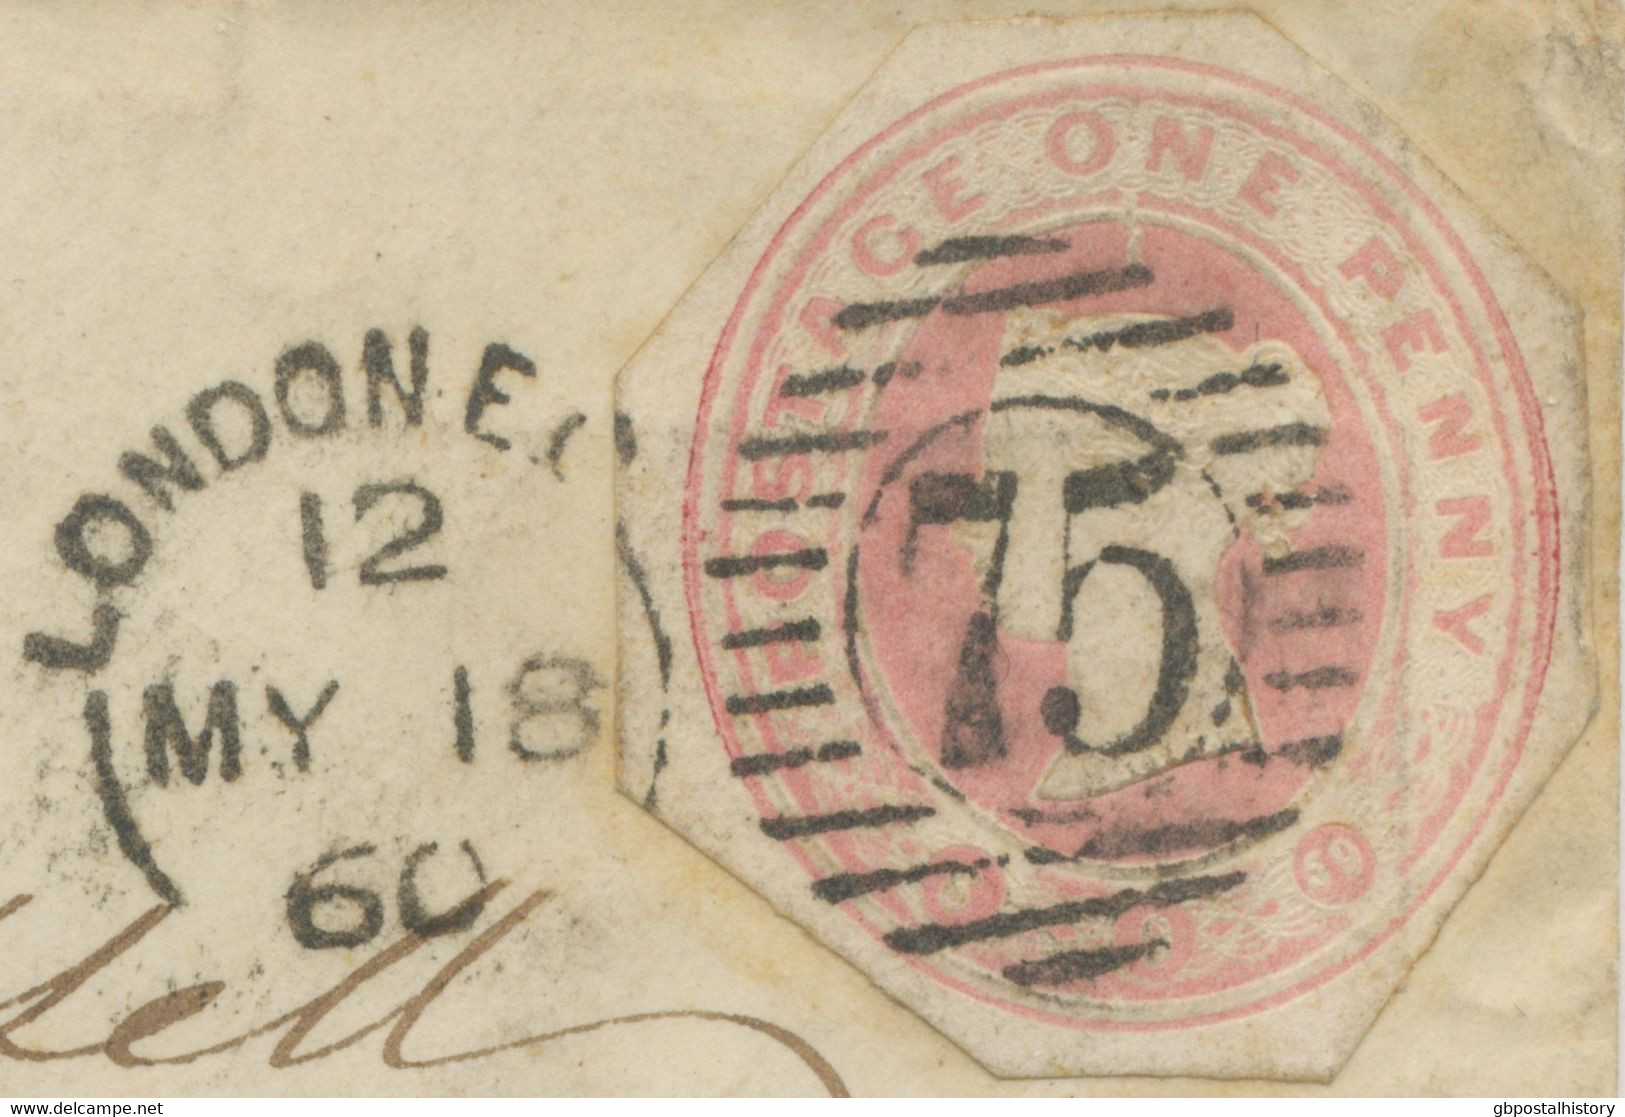 GB VERY EARLY USAGE OF POSTAL STATIONERY CUT OUT 18.5.1860 QV 1d Pink LONDON EC - Storia Postale